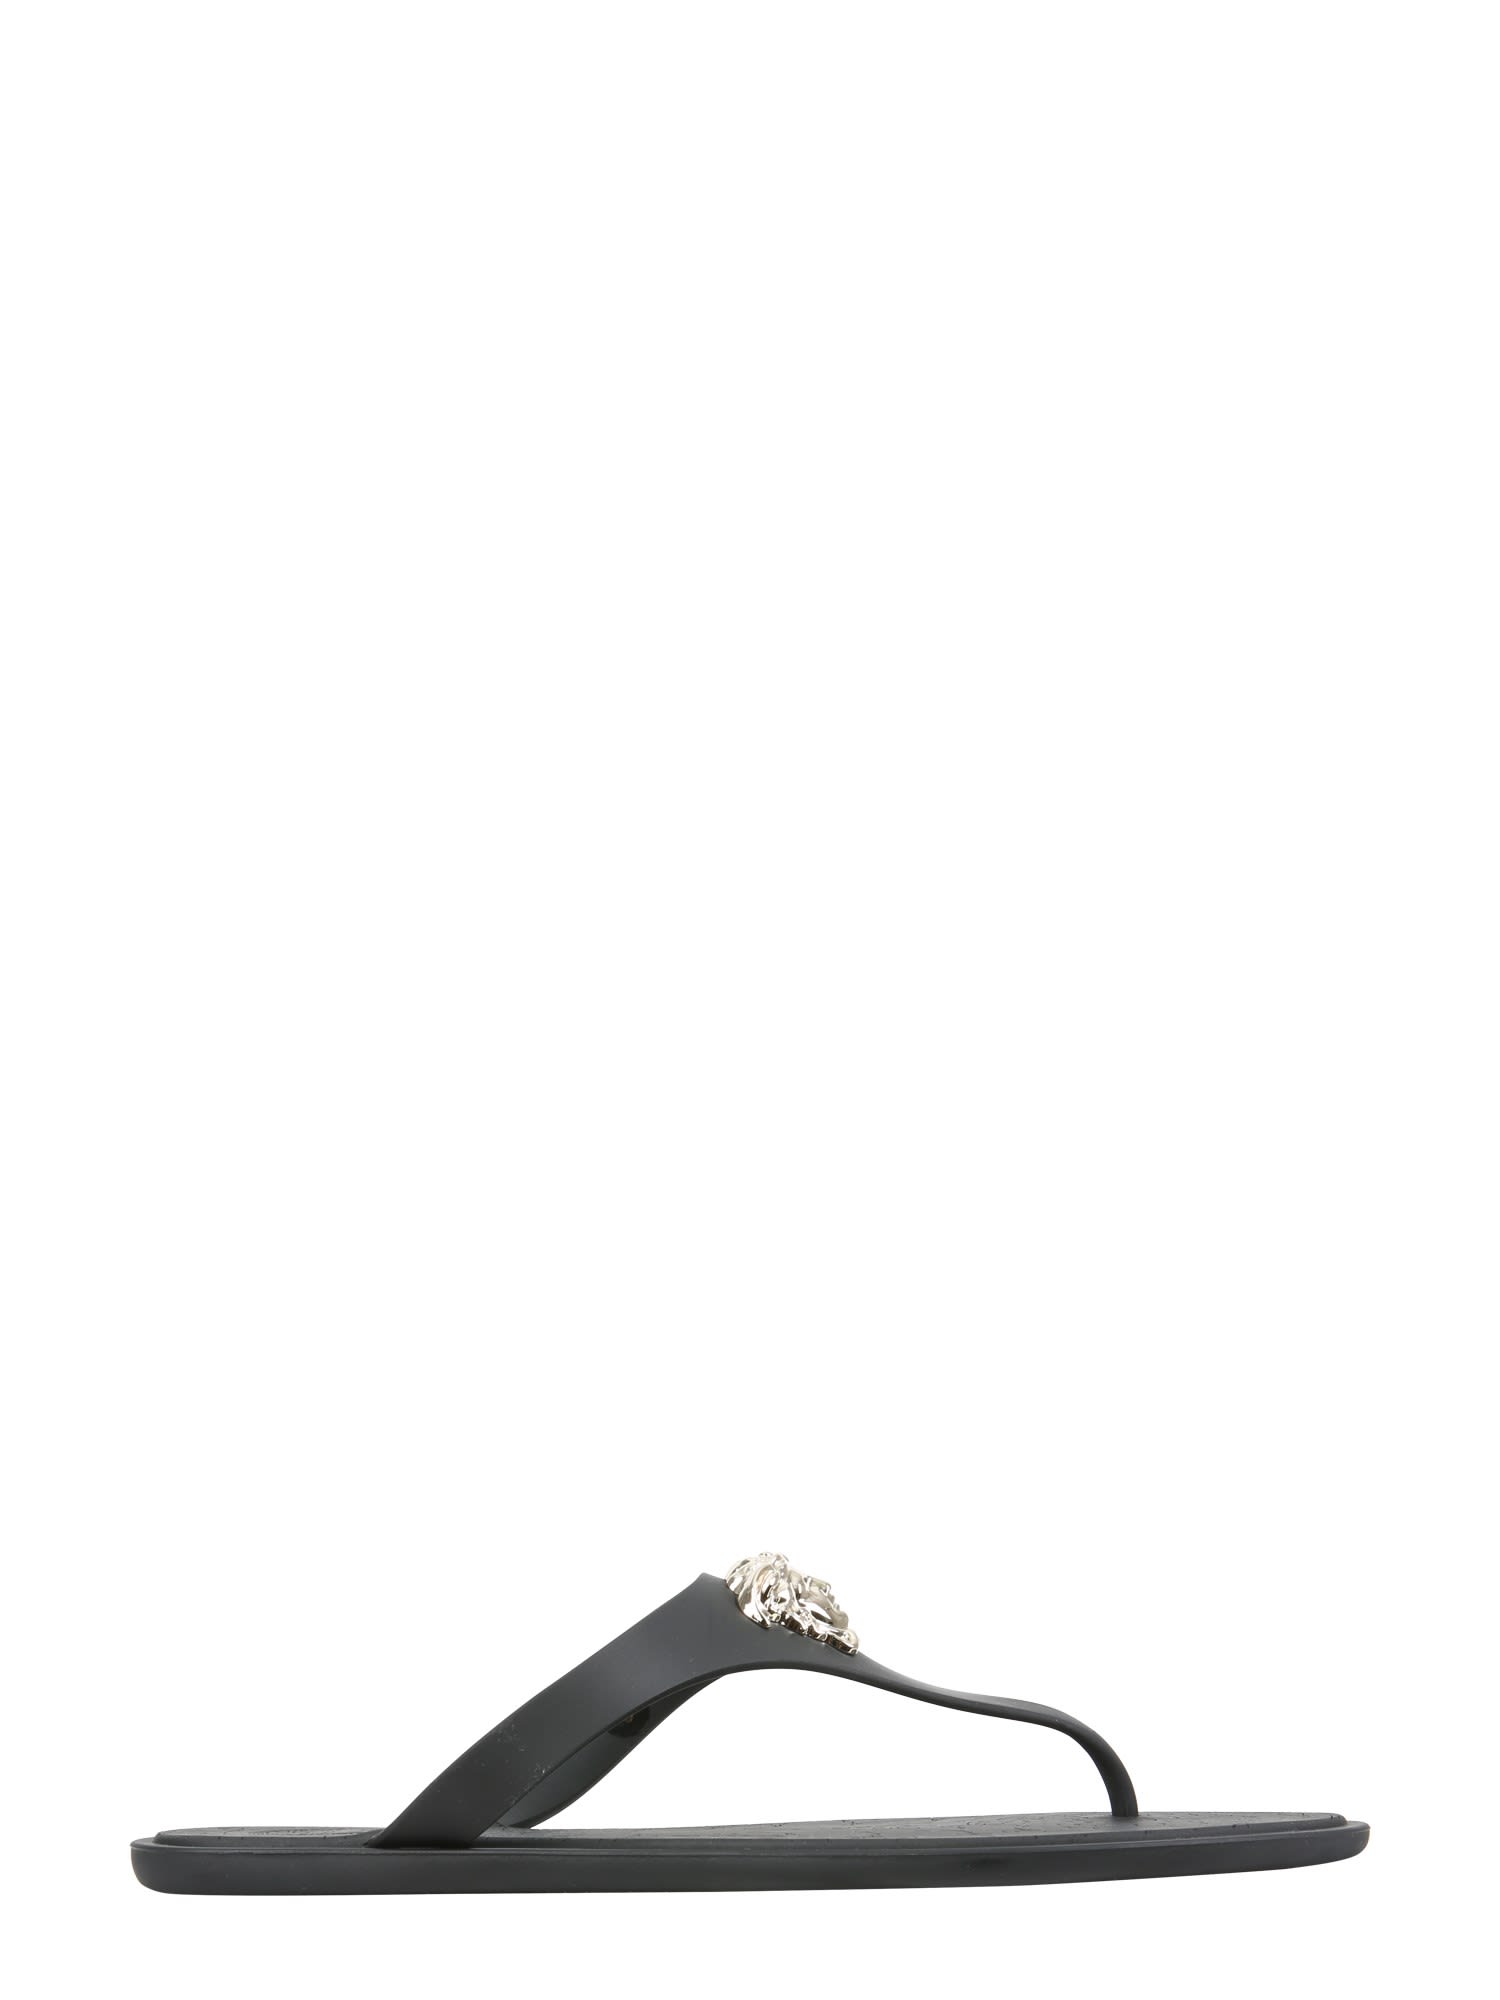 Buy Versace La Medusa Thong Sandals online, shop Versace shoes with free shipping